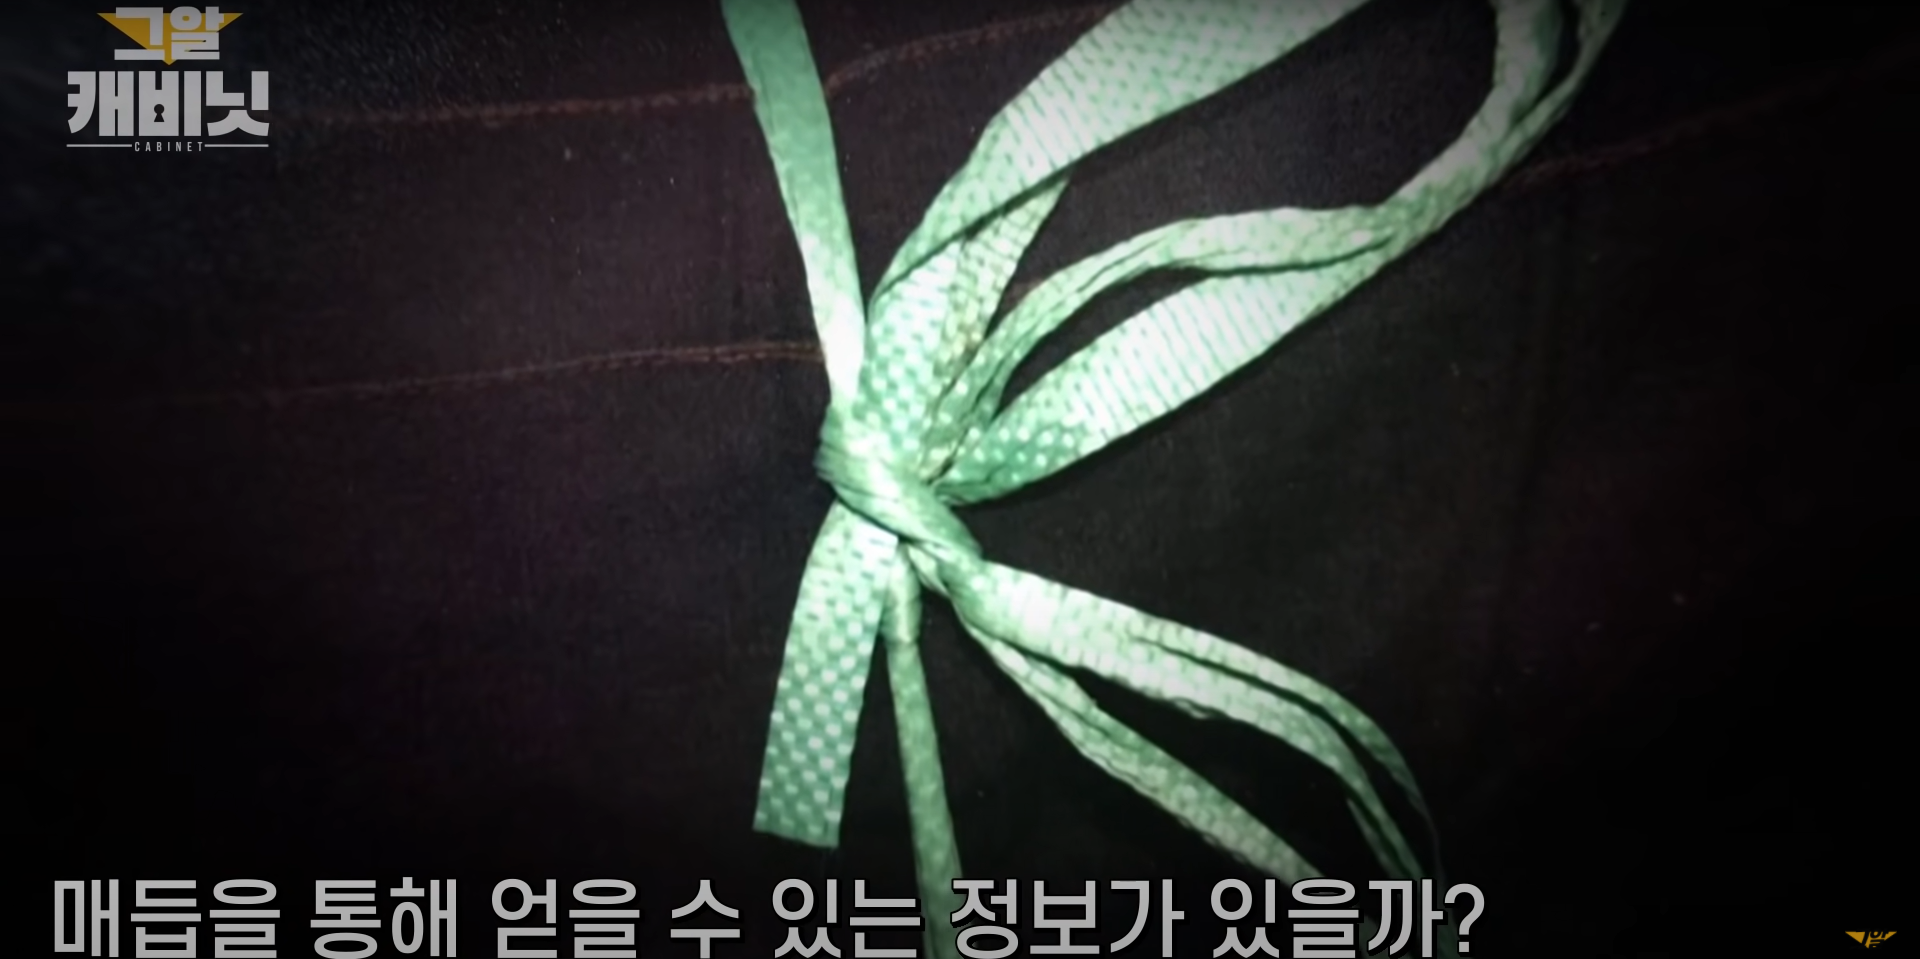 unsolved crimes in korea - knot